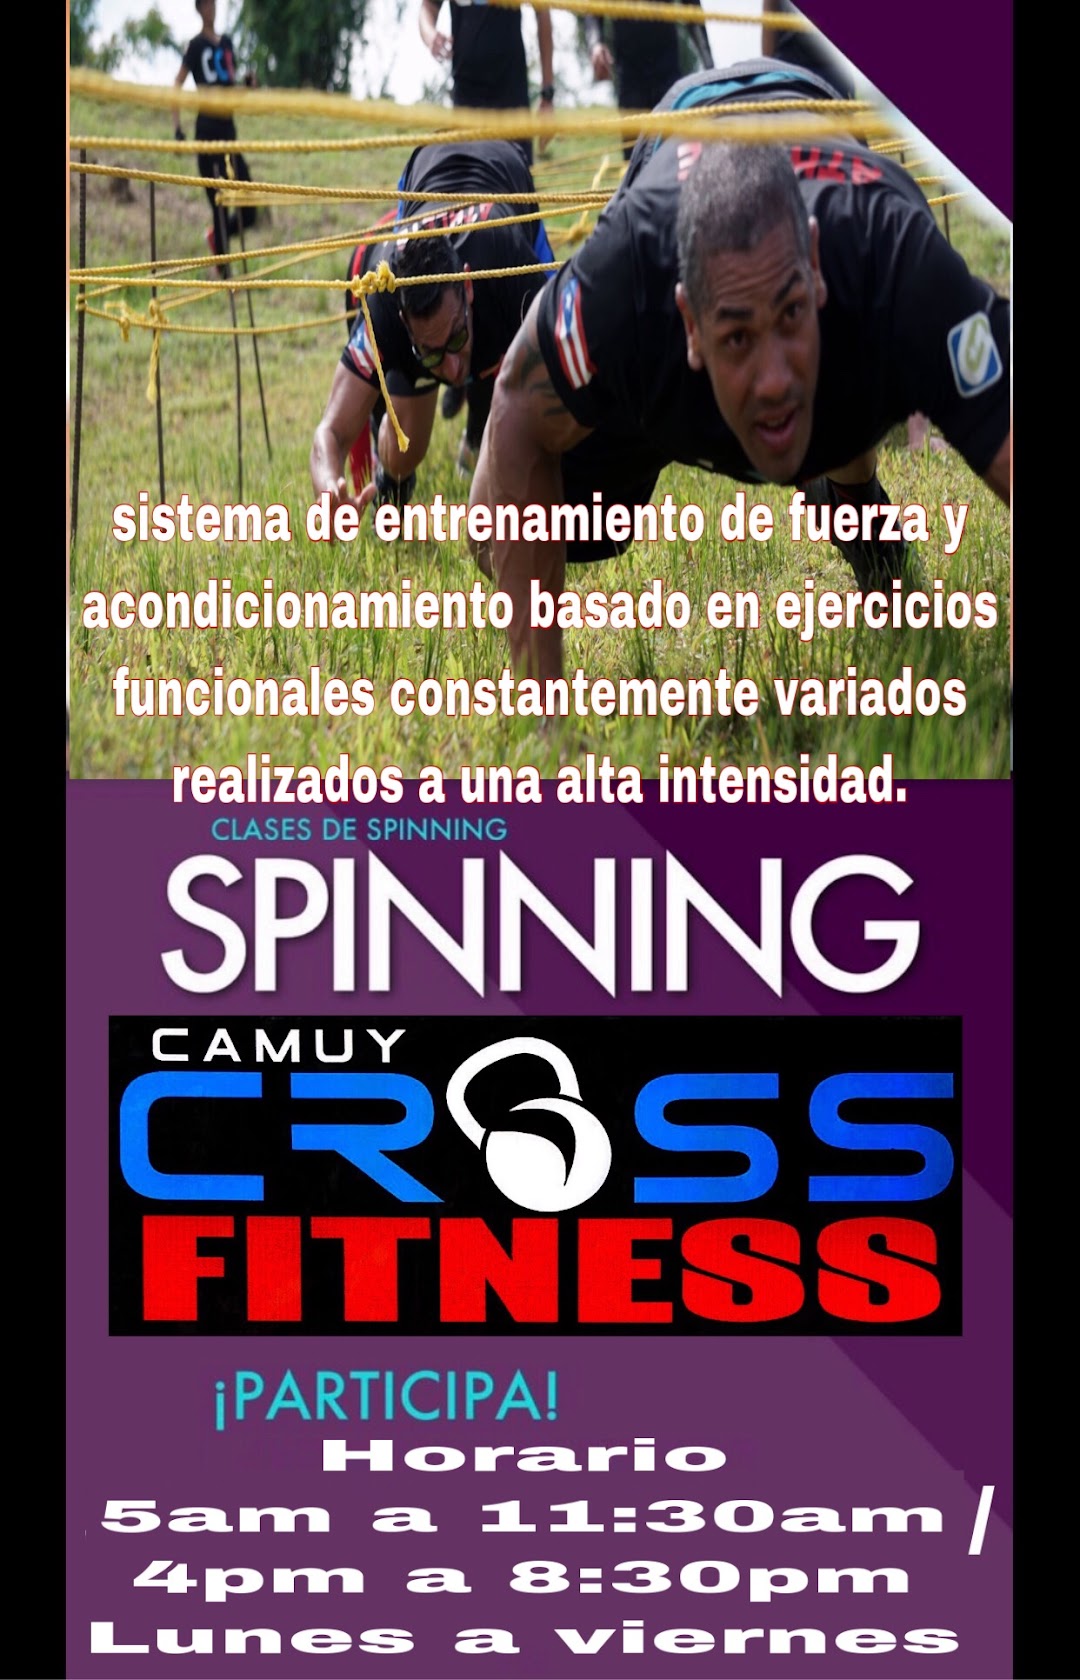 Camuy Cross-Fitness & Spinning